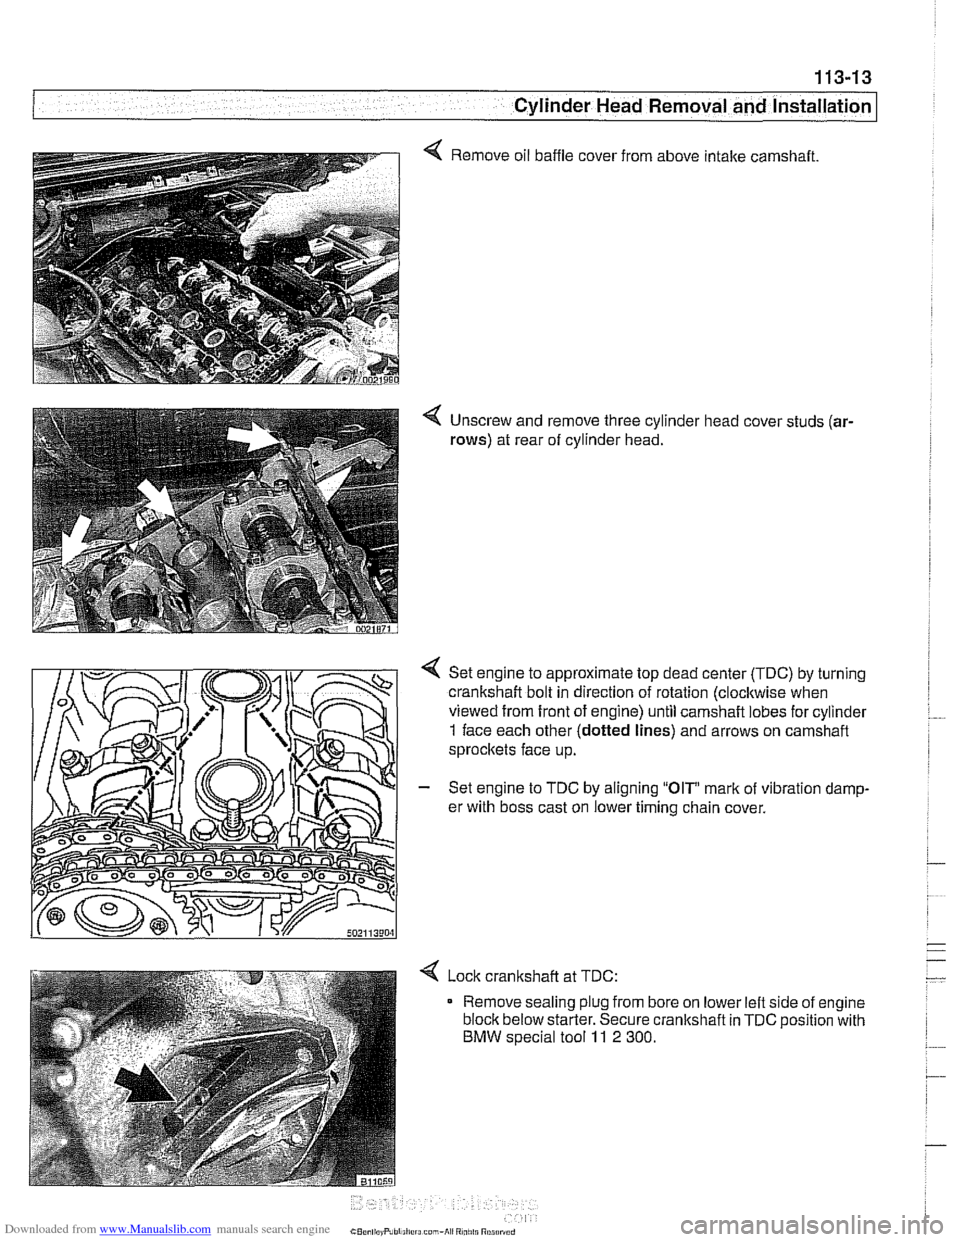 BMW 540i 1997 E39 Owners Guide Downloaded from www.Manualslib.com manuals search engine 
- - , -. I Cylinder Head Removal and lnstallatio~ 
4 Remove oil baffle  cover from  above intake camshaft. 
4 Unscrew  and remove  three cylin